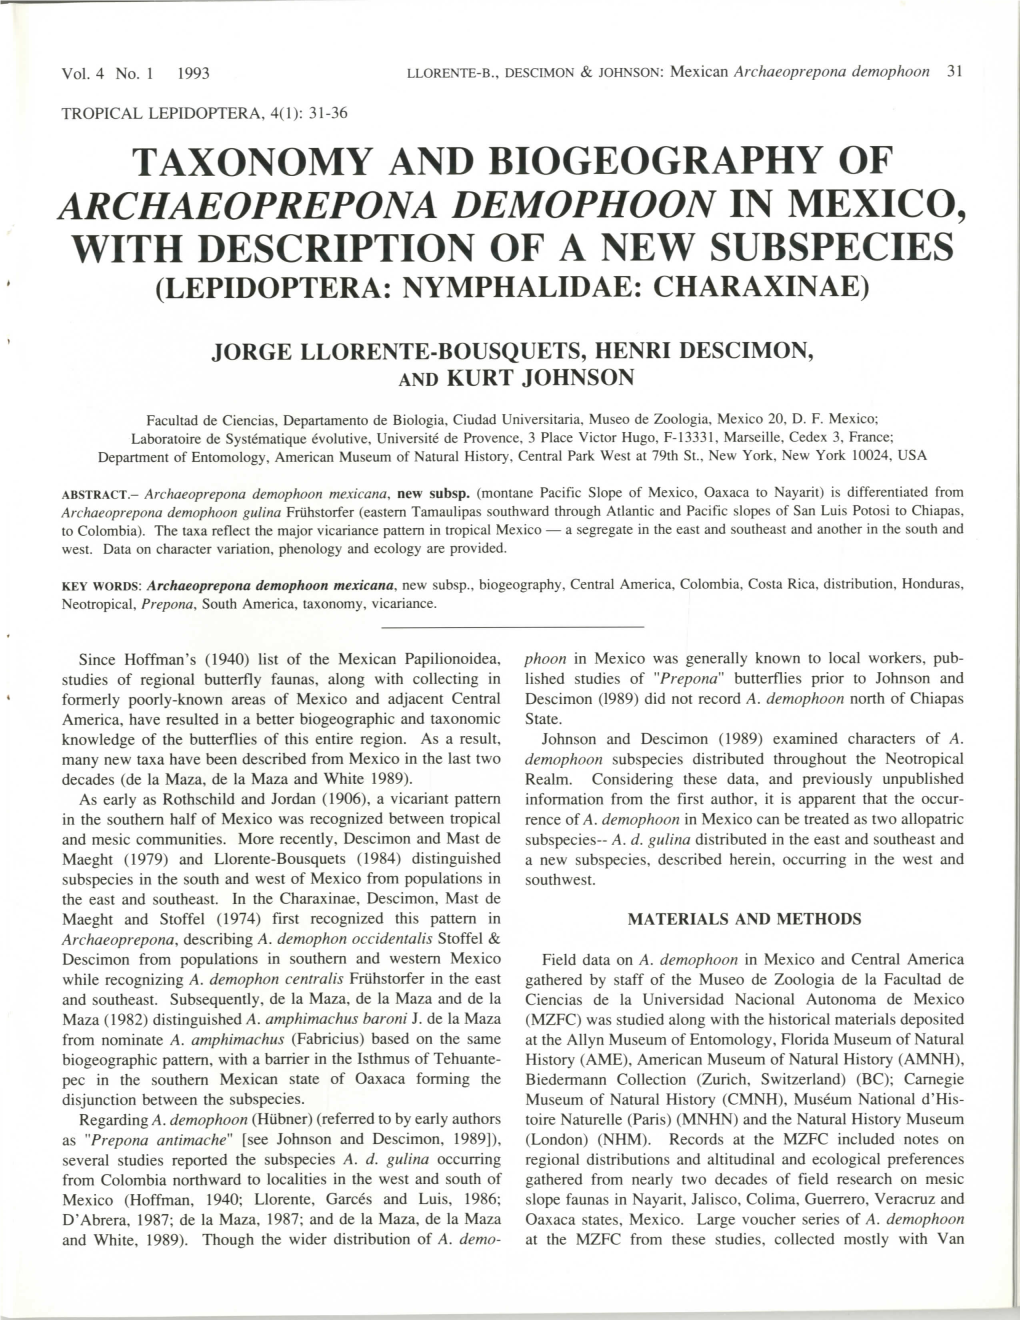 Taxonomy and Biogeography of Archaeoprepona Demophoon in Mexico, with Description of a New Subspecies (Lepidoptera: Nymphalidae: Charaxinae)